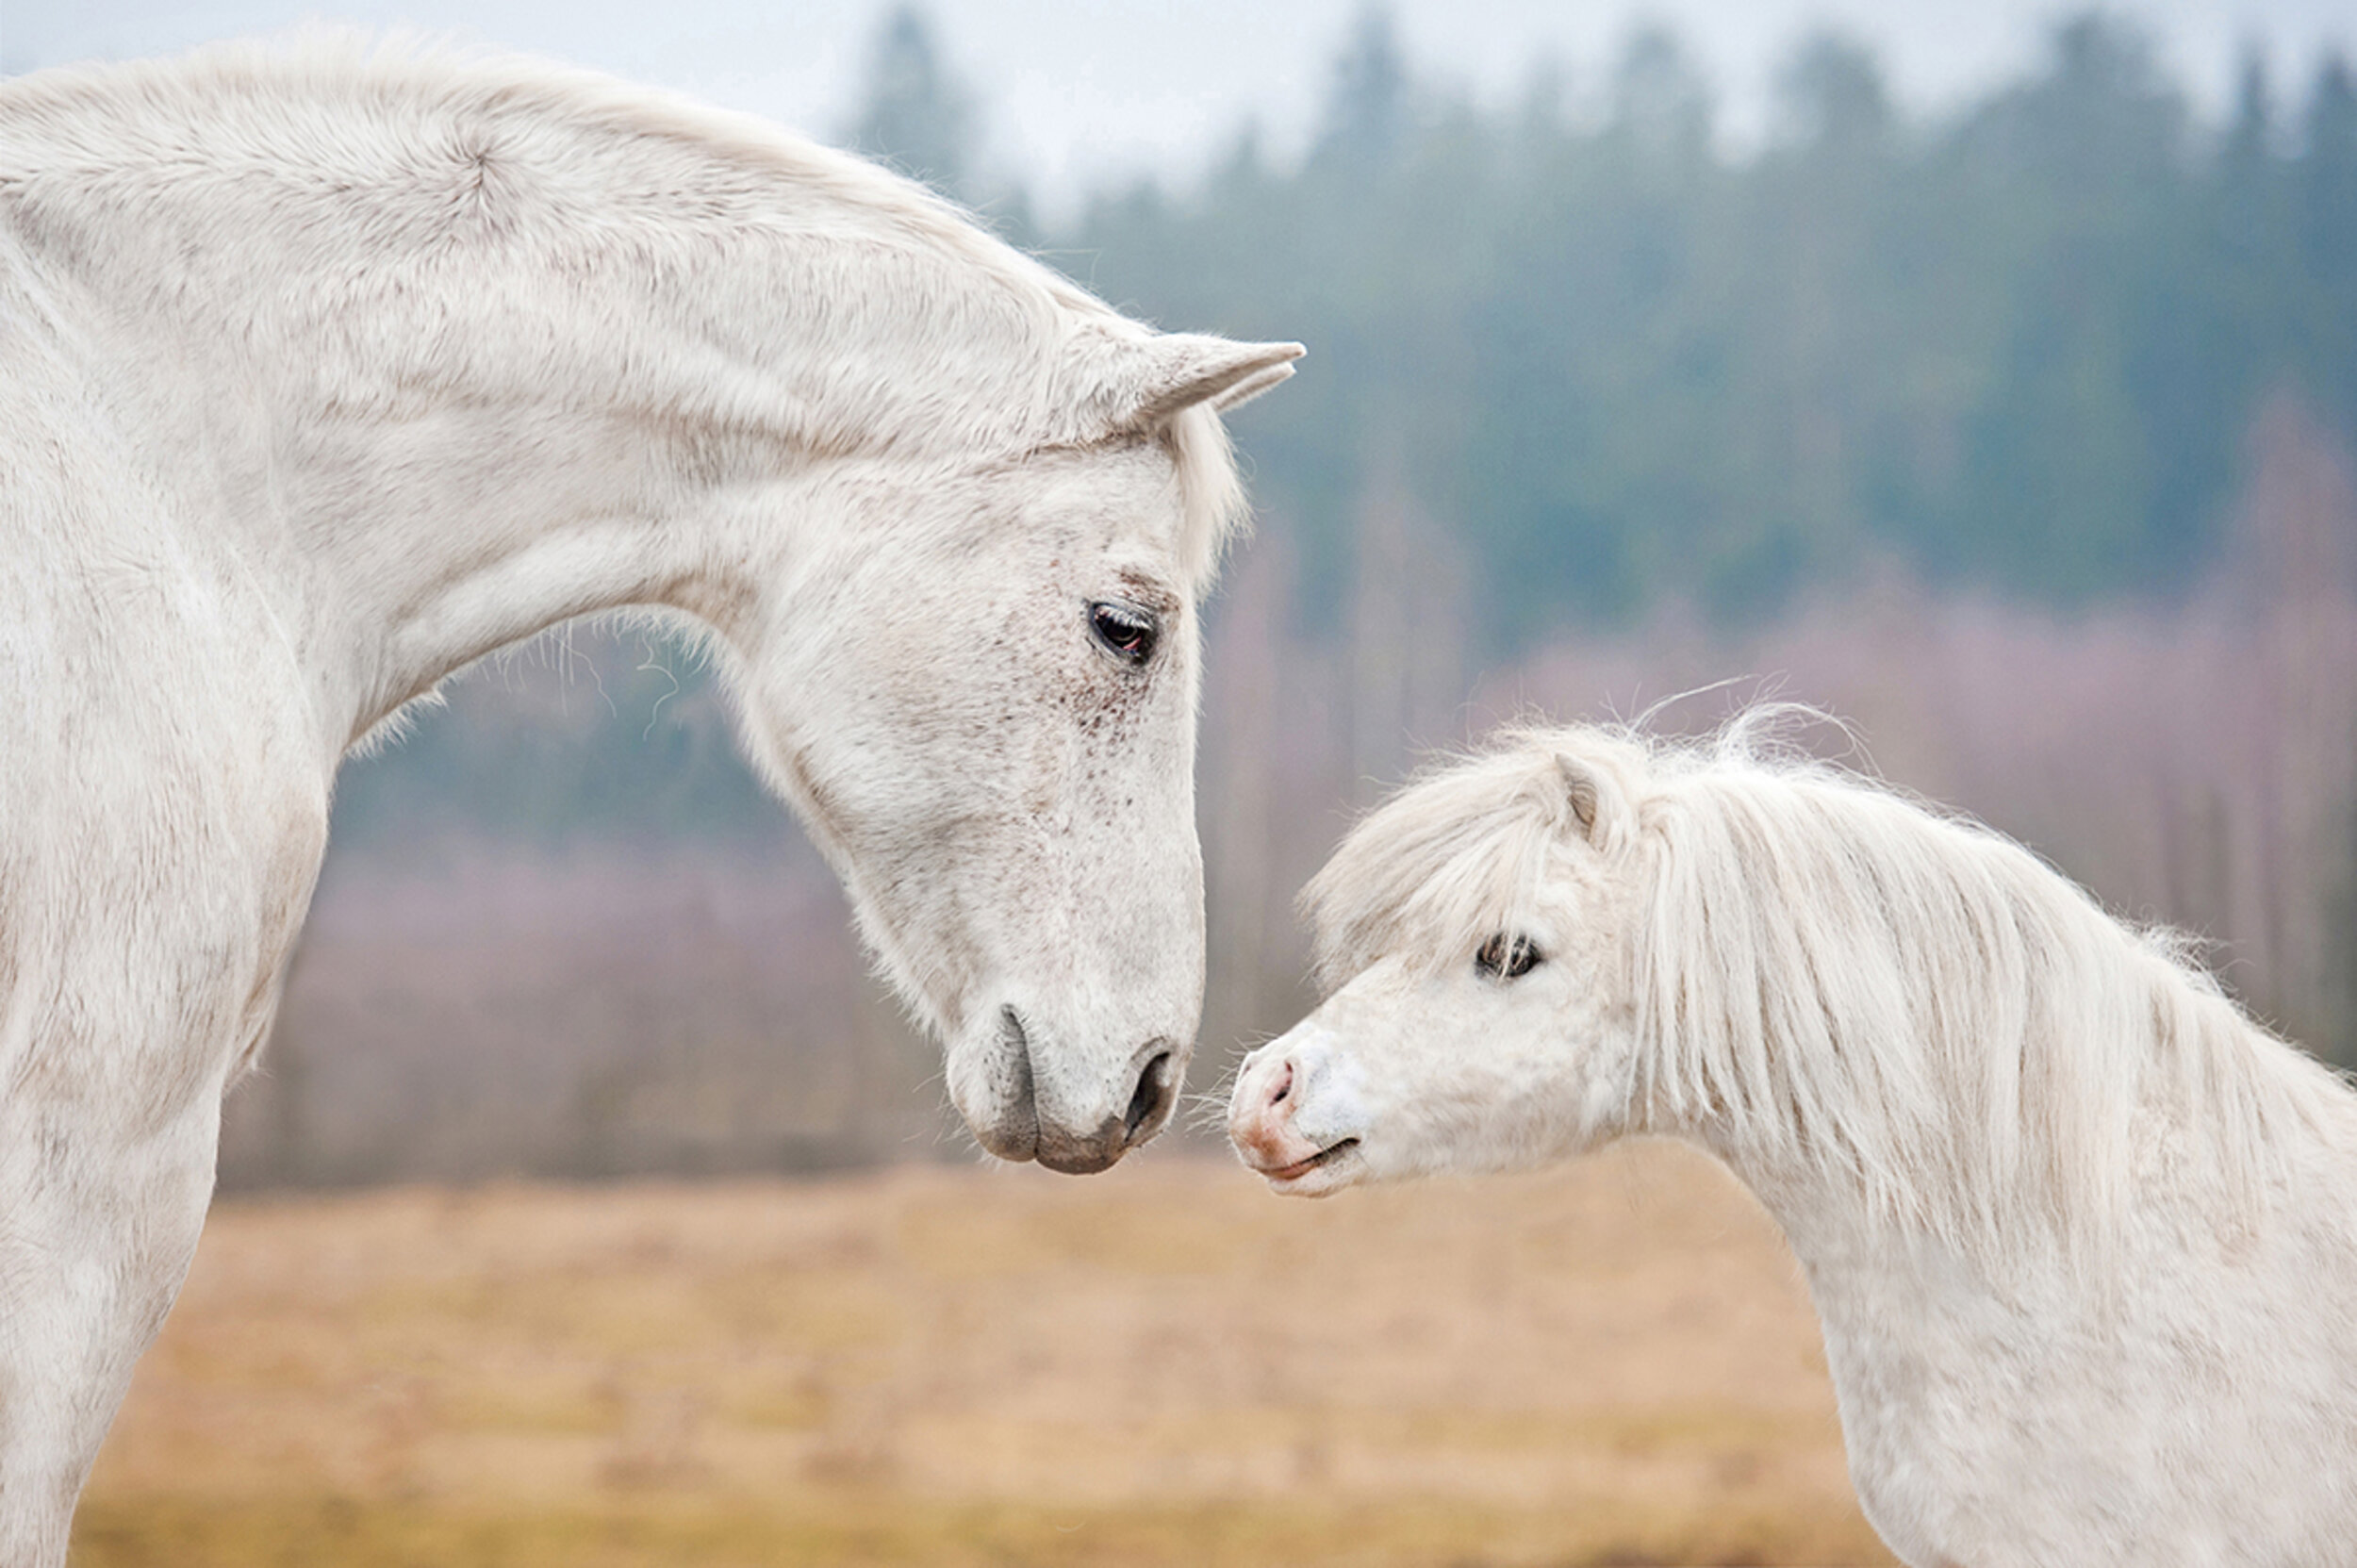 A young and grown up horse touching noses